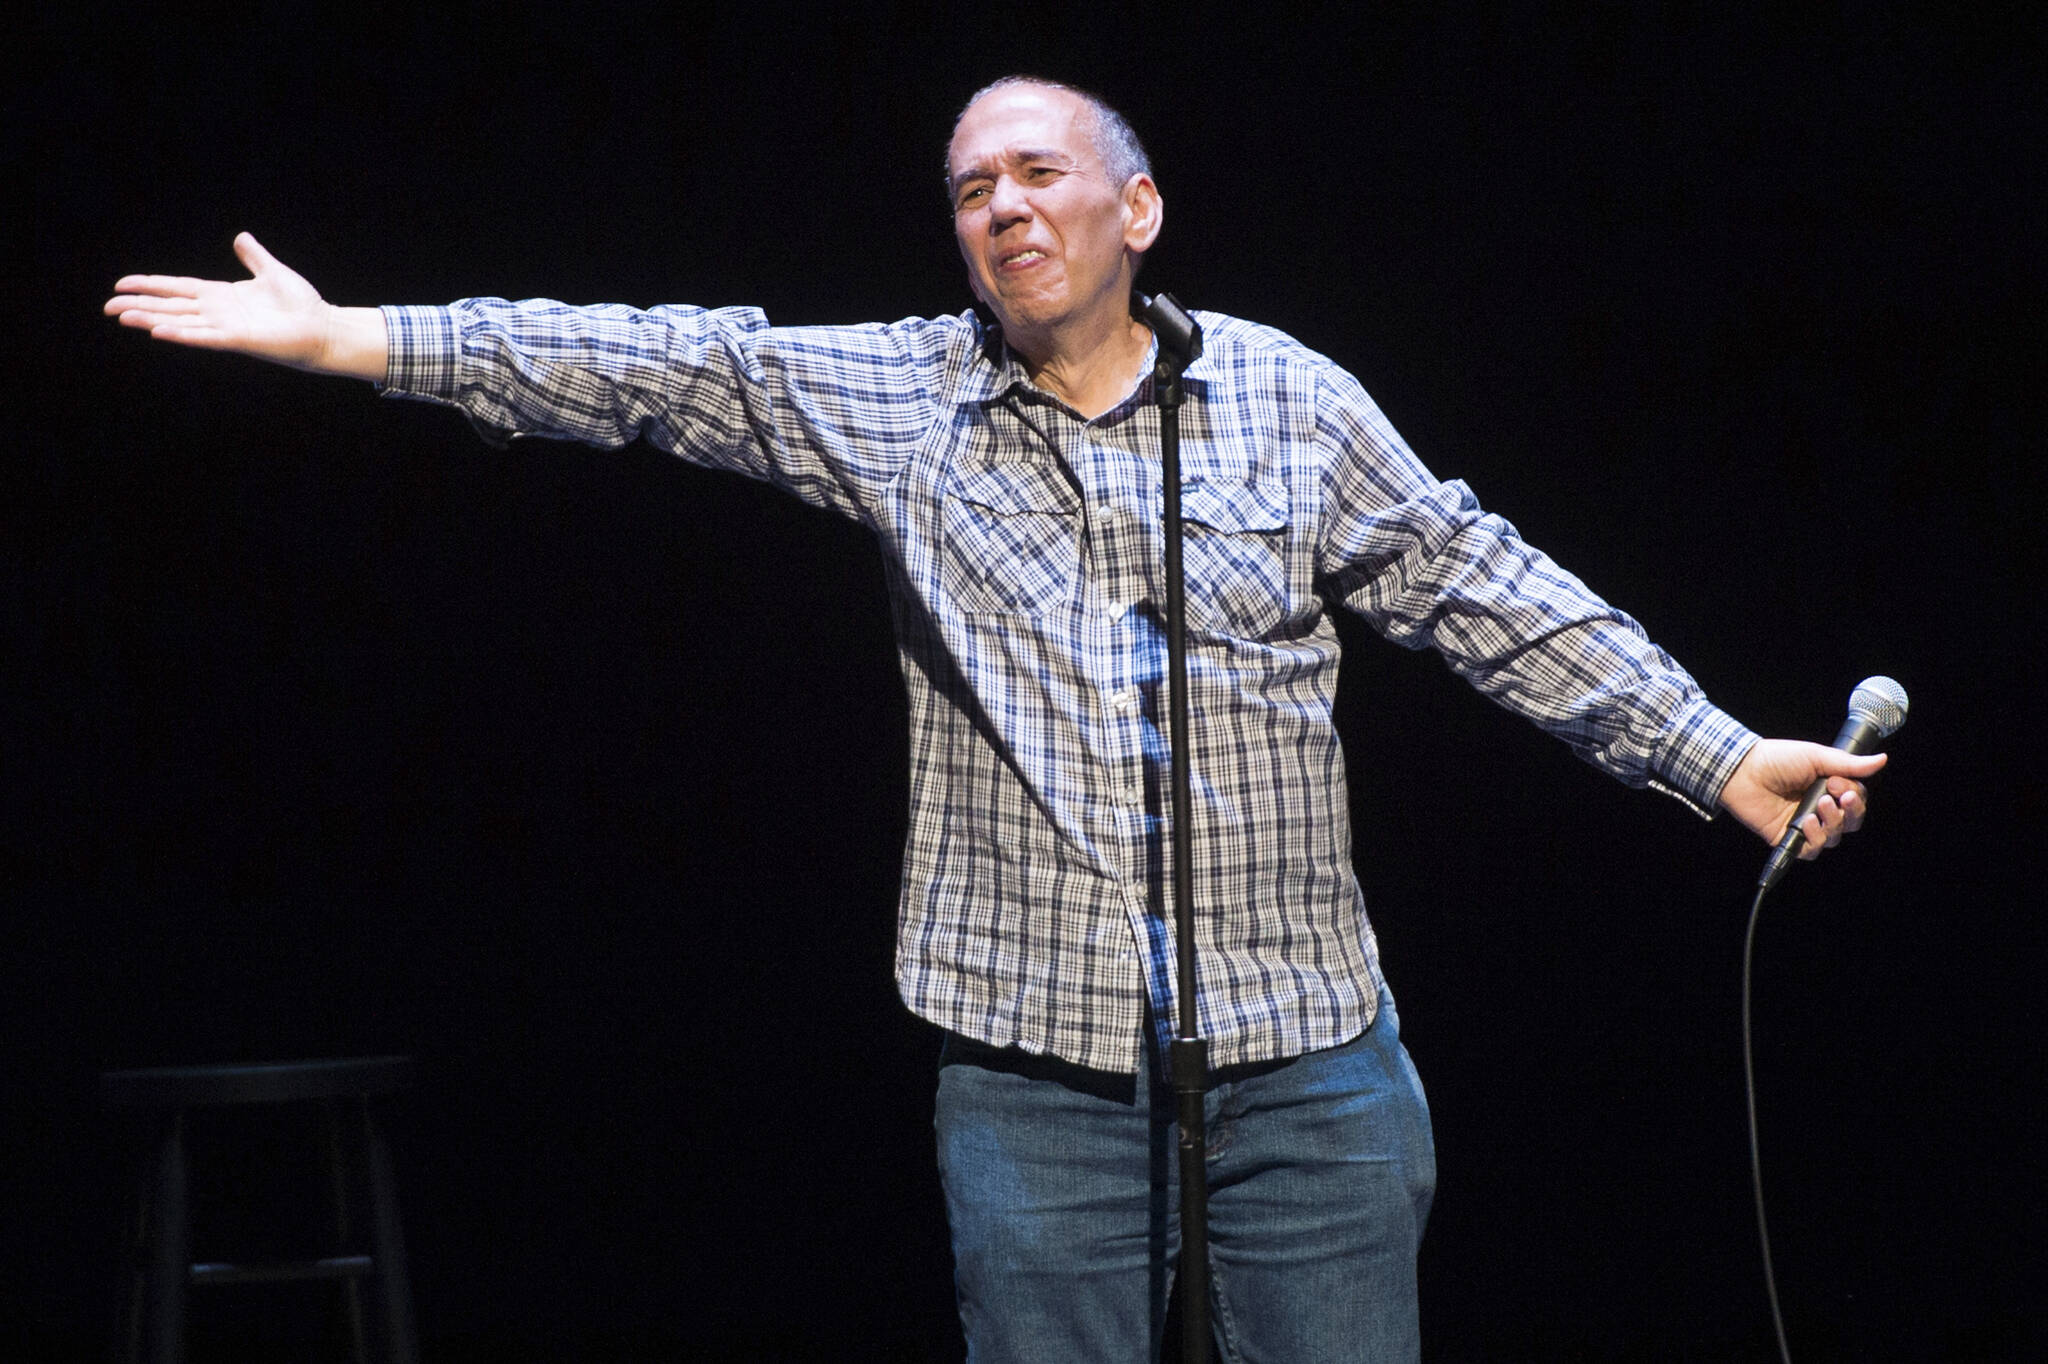 FILE - Comedian Gilbert Gottfried performs at a David Lynch Foundation Benefit for Veterans with PTSD on April 30, 2016, in New York. Gottfried’s publicist and longtime friend Glenn Schwartz said Gottfried, an actor and legendary standup comic known for his abrasive voice and crude jokes, died Tuesday, April 12, 2022. He was 67. (Photo by Scott Roth/Invision/AP, File)